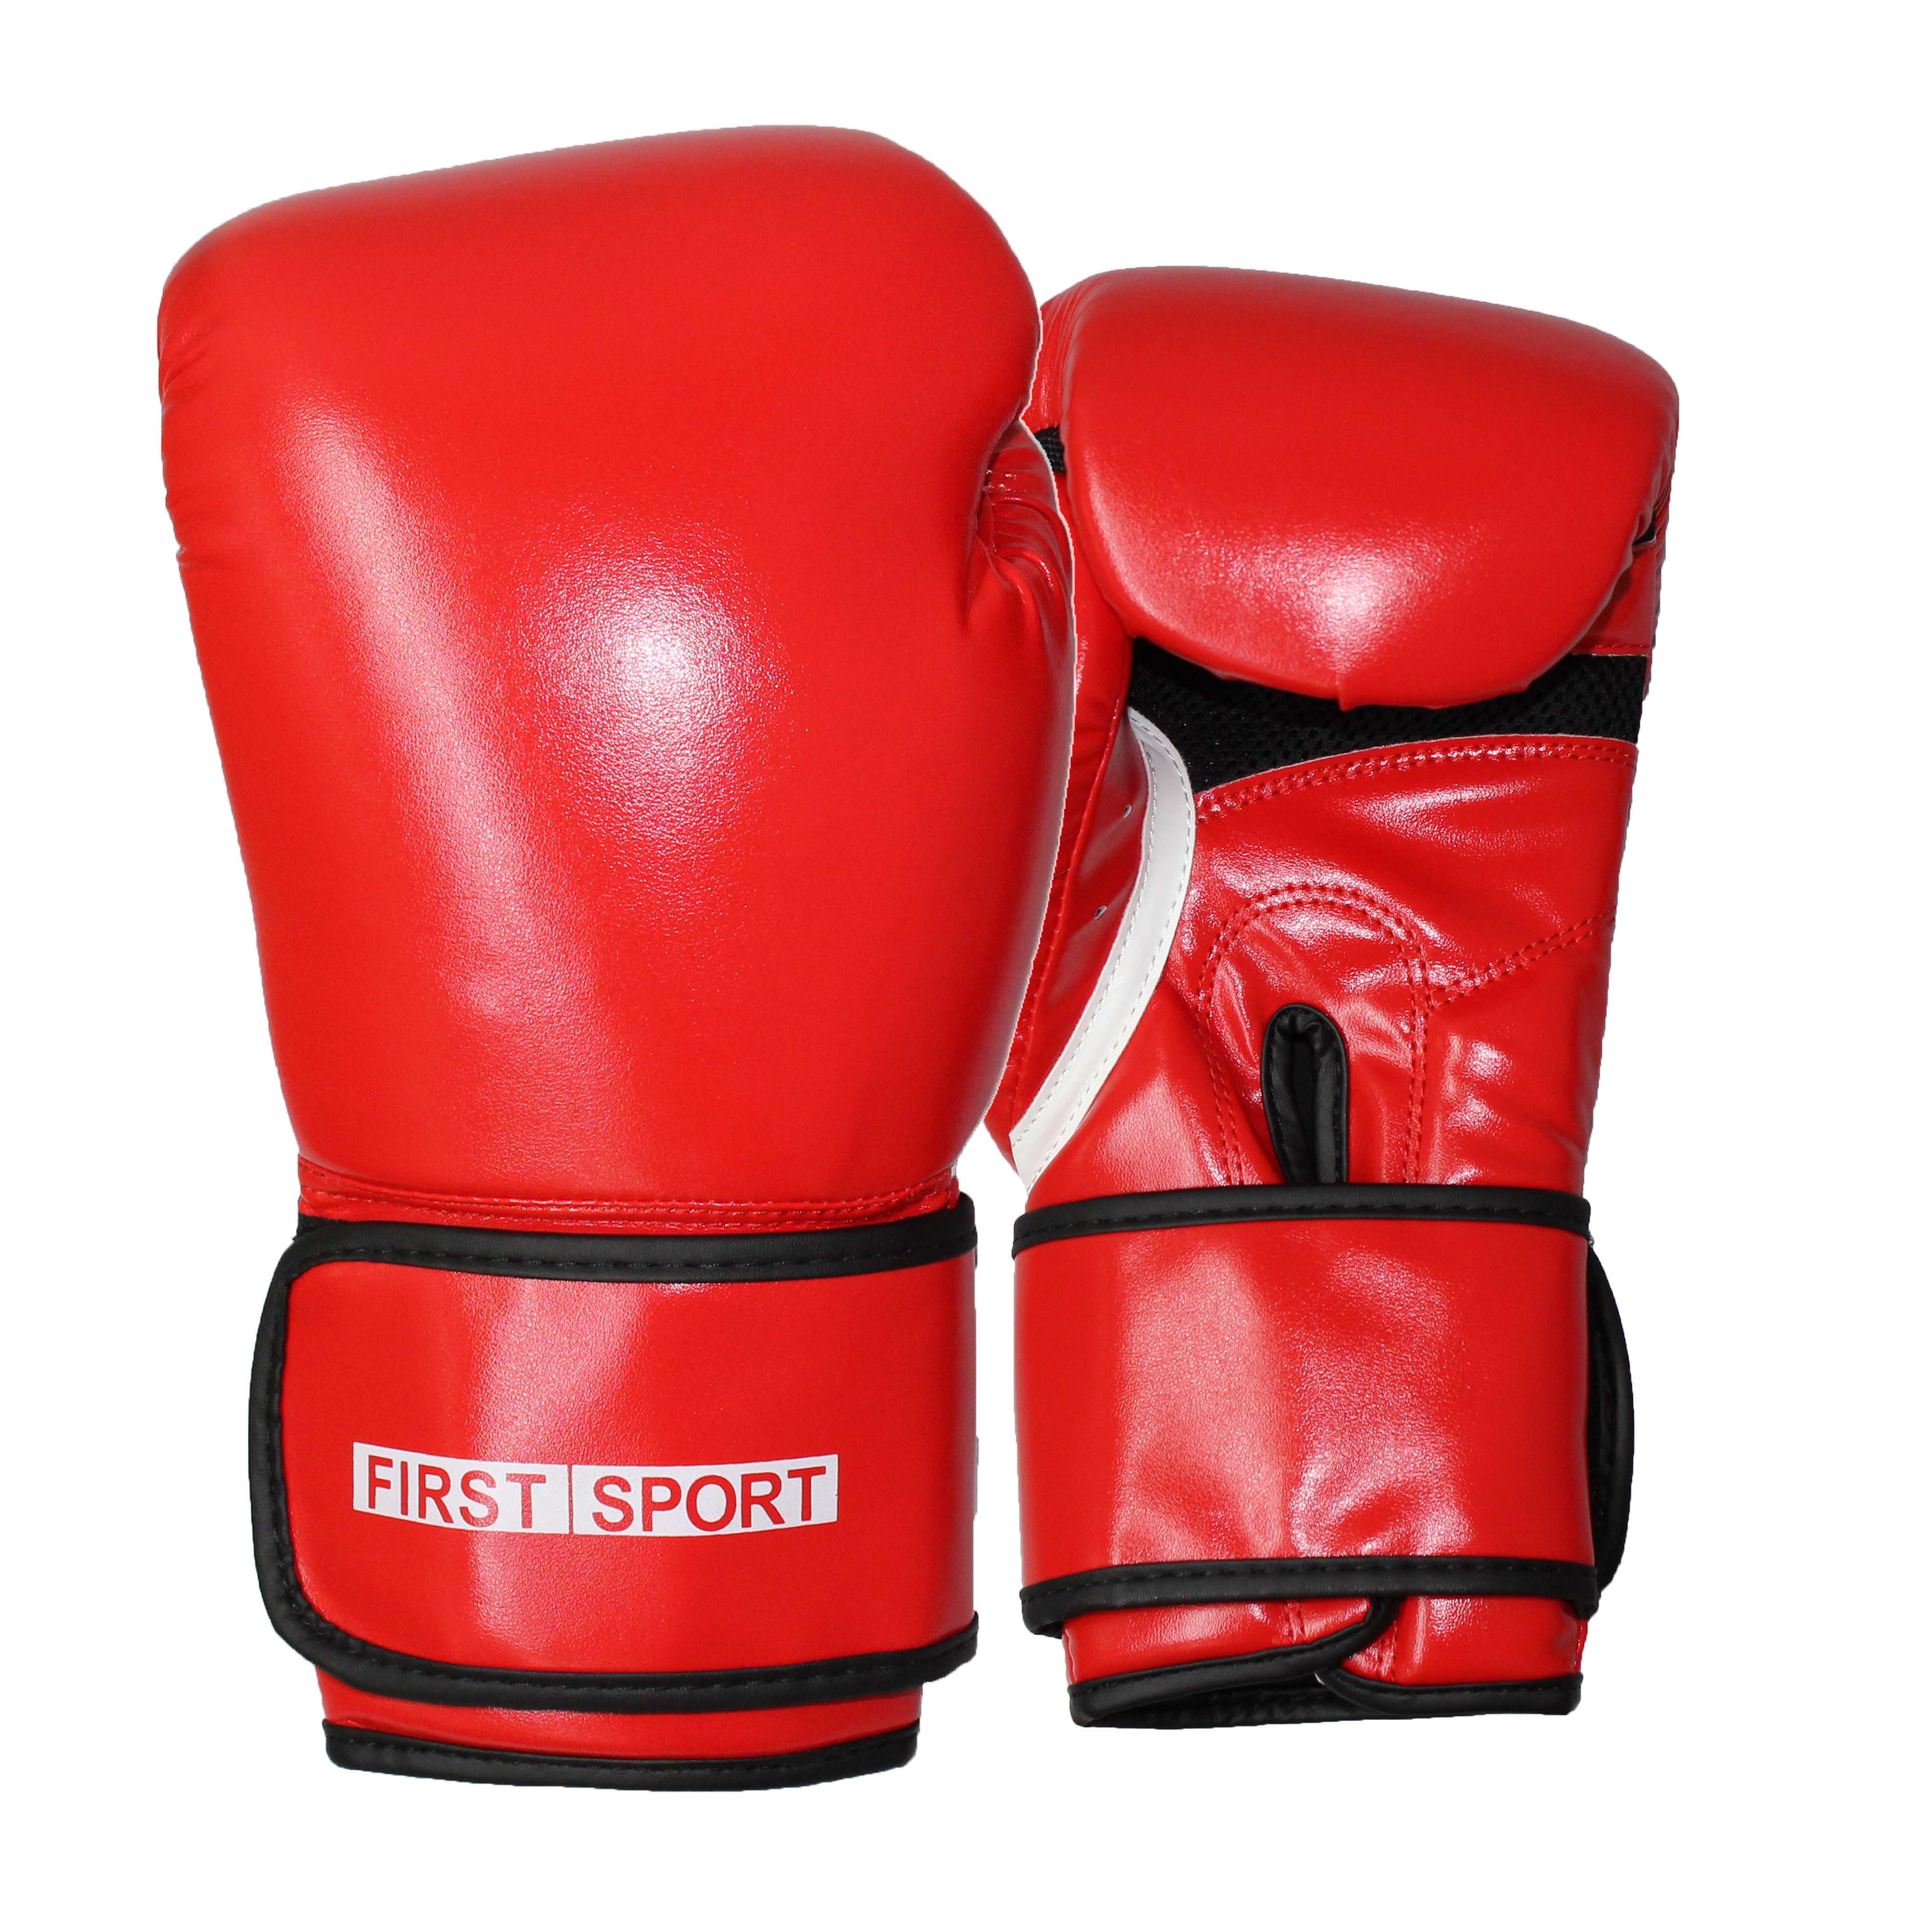 Nicaragua Boxing Glove Nicaragua Flag Toys & Games Sports & Outdoor Recreation Martial Arts & Boxing Boxing Gloves Mini Nicaragua Boxing Glove 